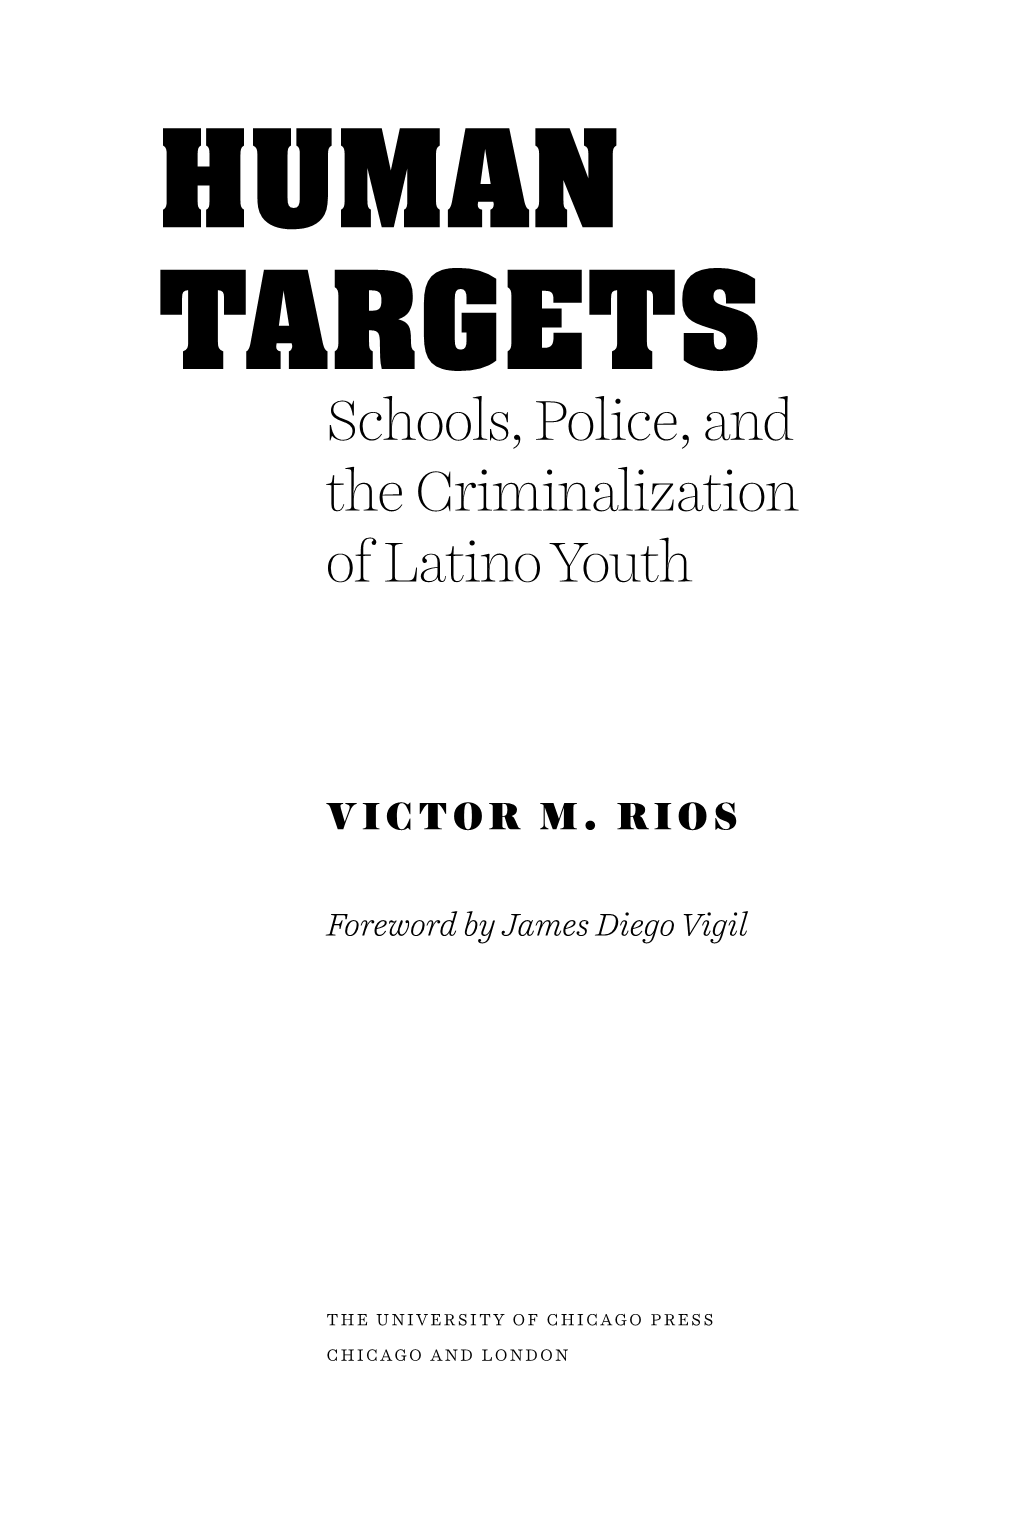 HUMAN TARGETS Schools, Police, and the Criminalization of Latino Youth